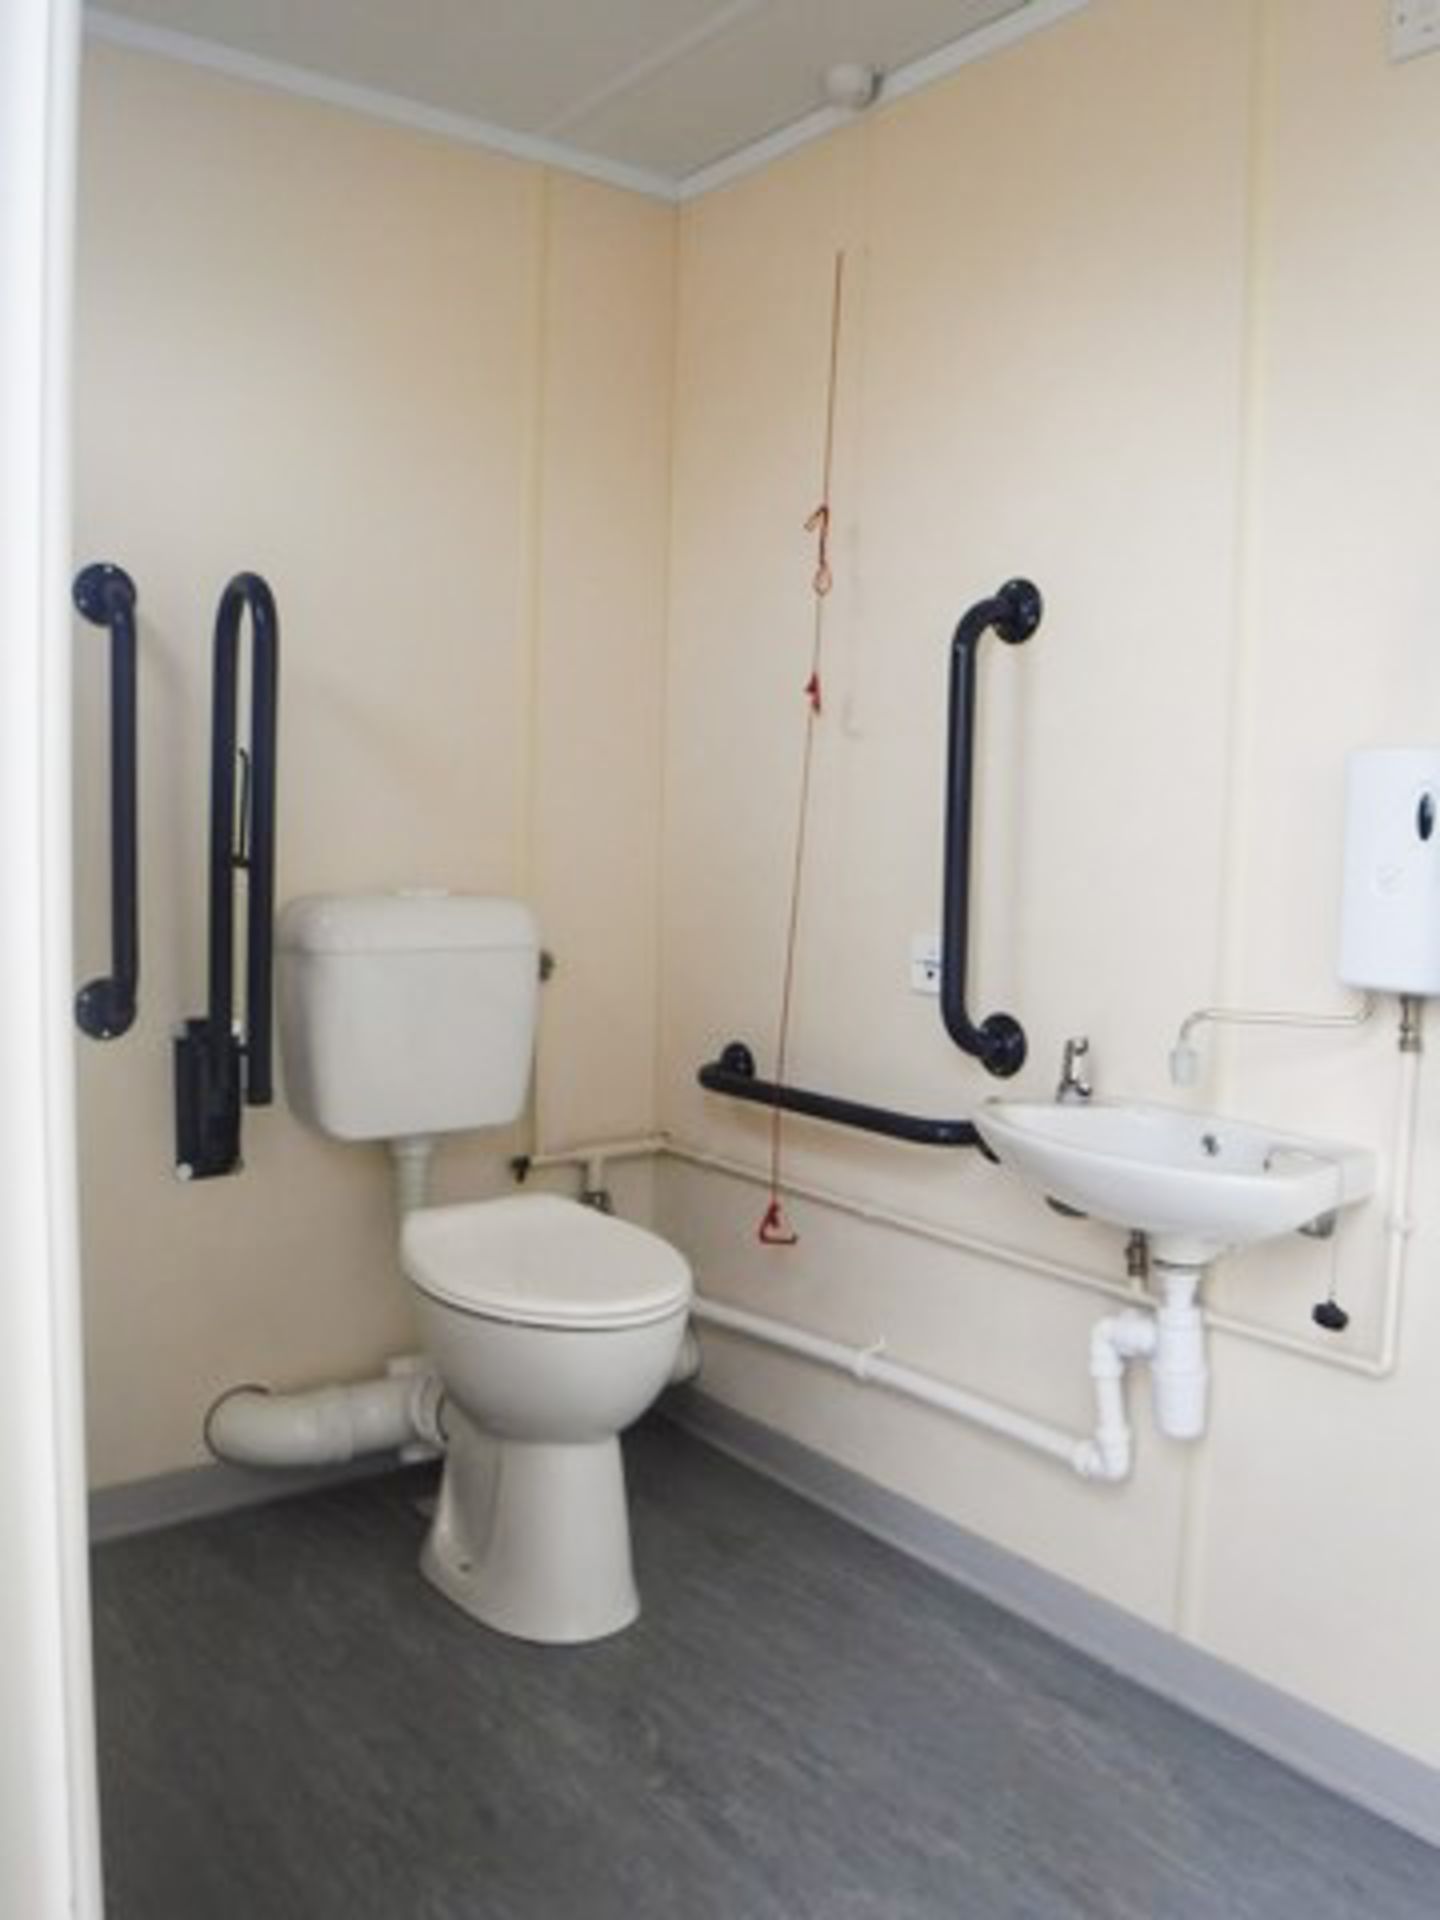 40ft x 10ft toilet block, c/w 10 cubicals, 10 urinals, 9 sinks, water heaters temp controlled anti-f - Image 3 of 9